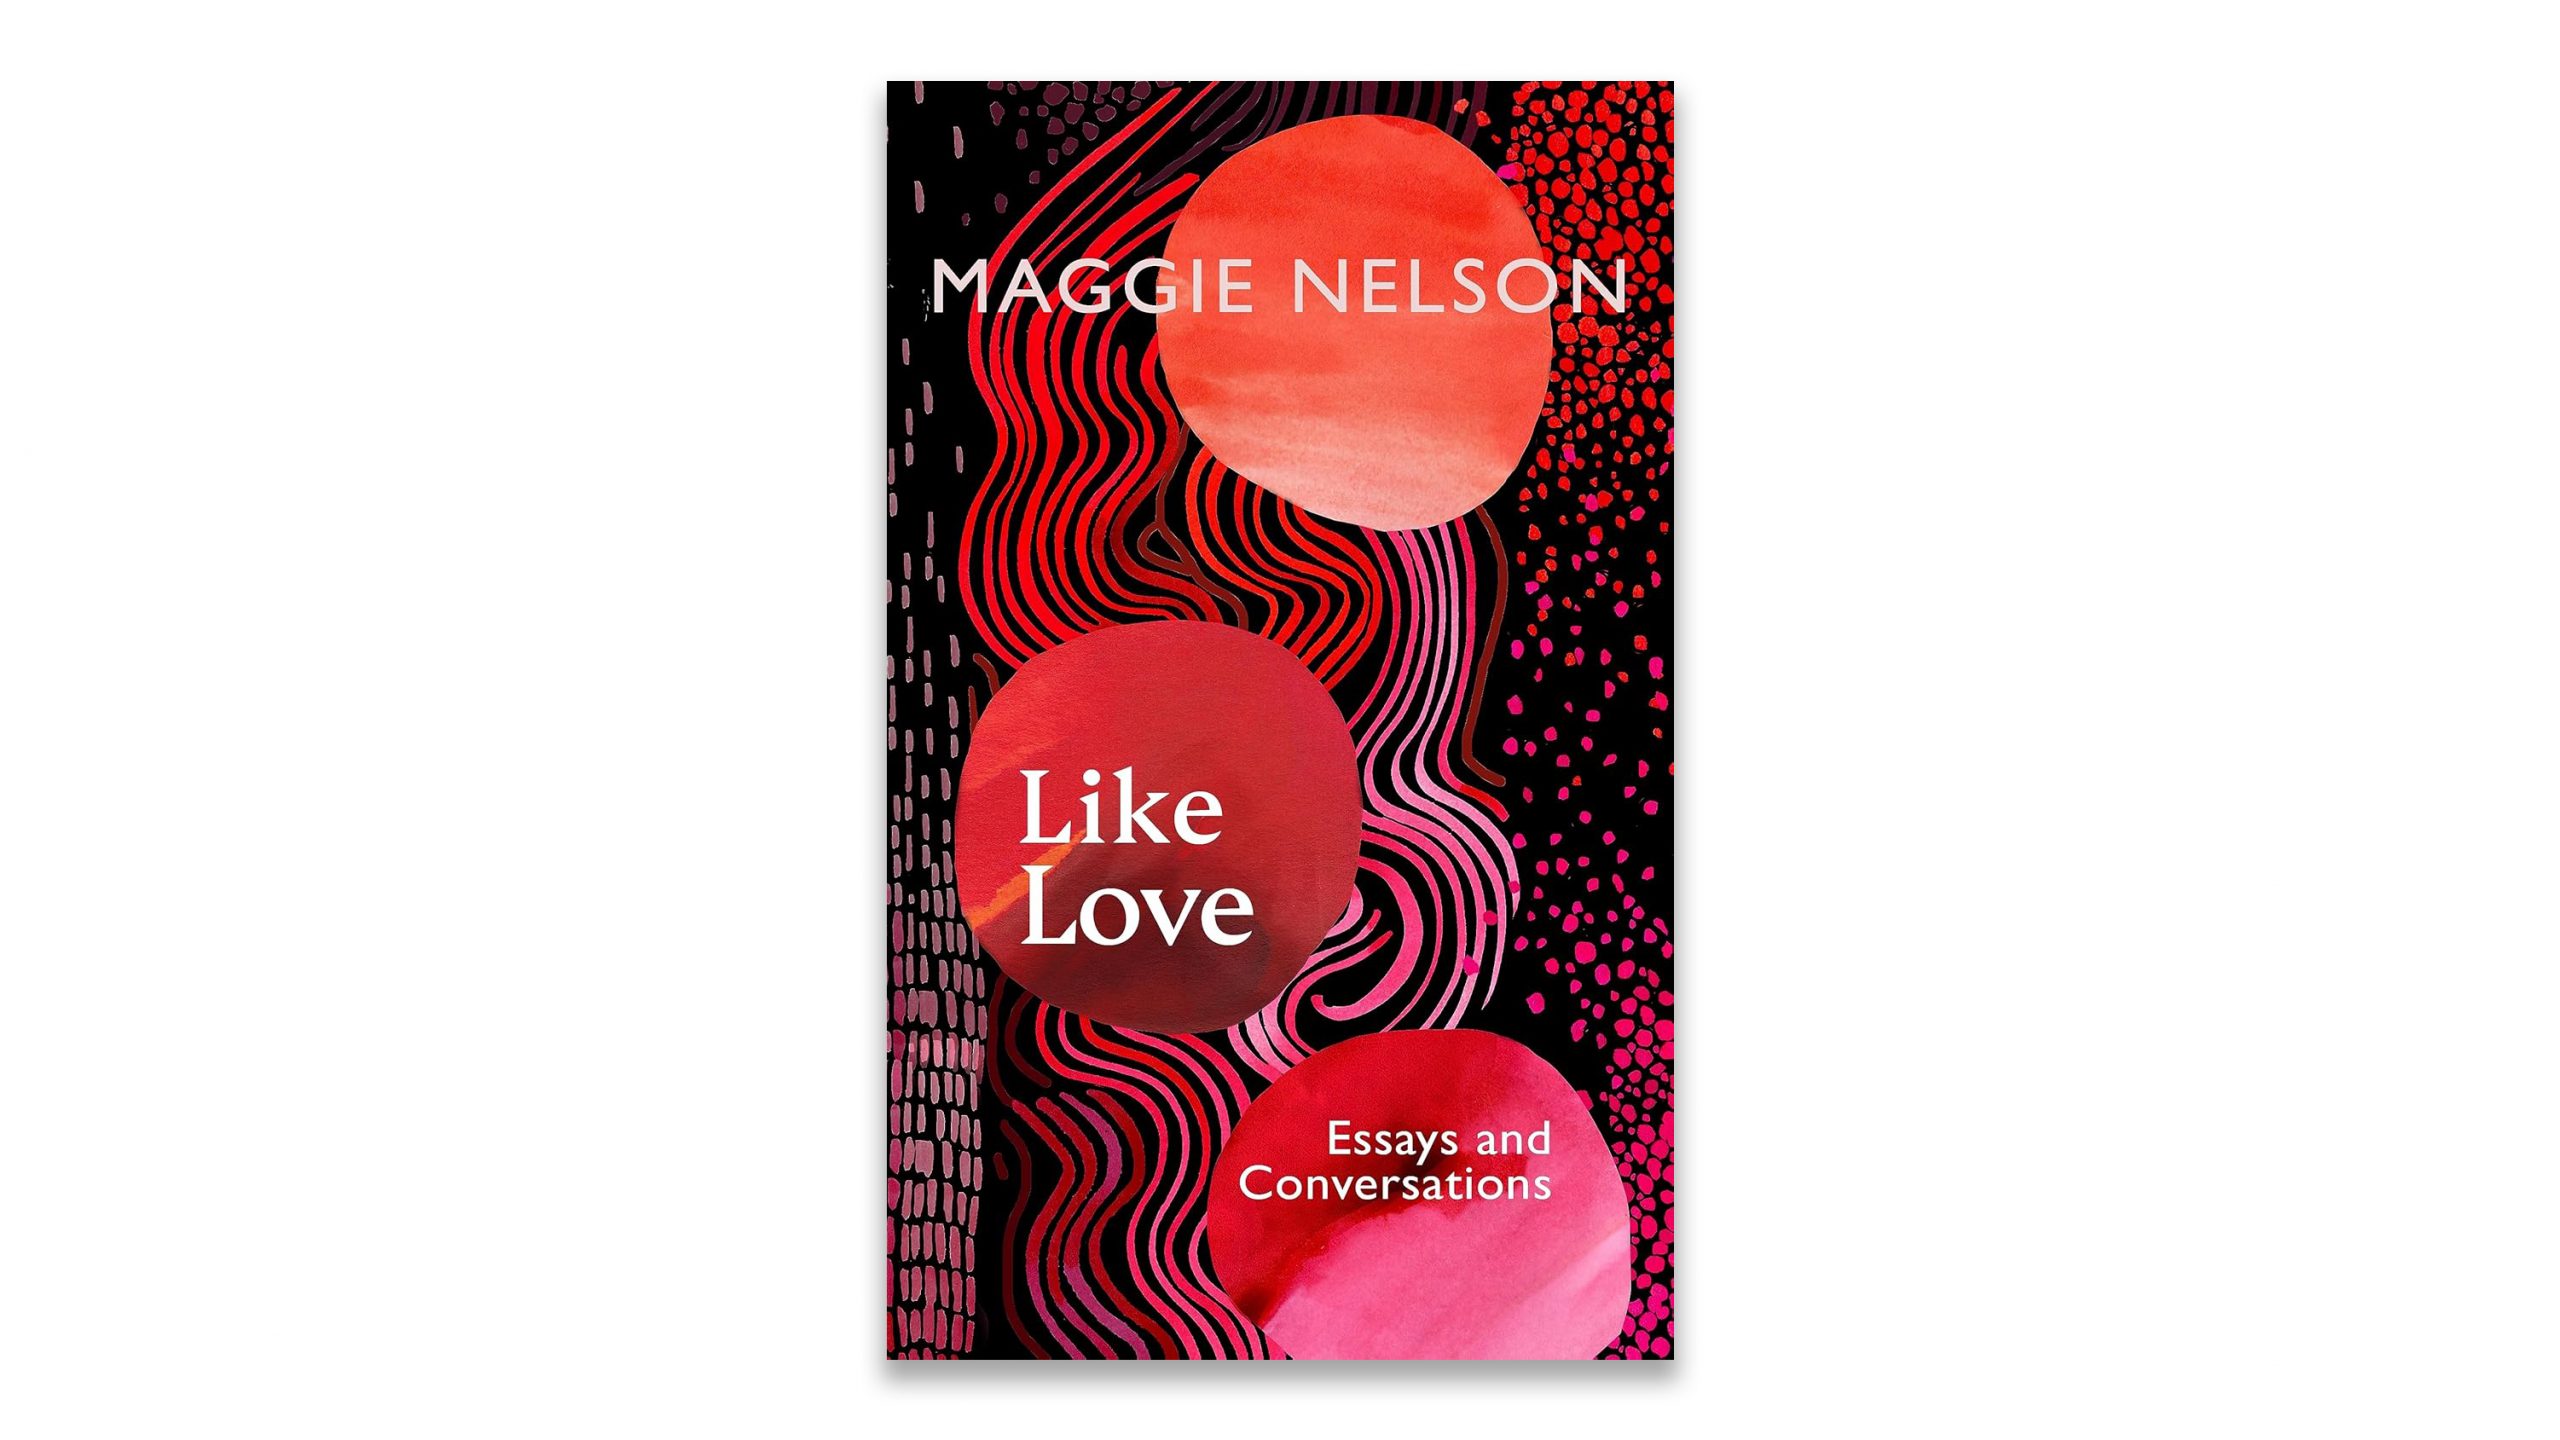 “Like Love” by Maggie Nelson, review